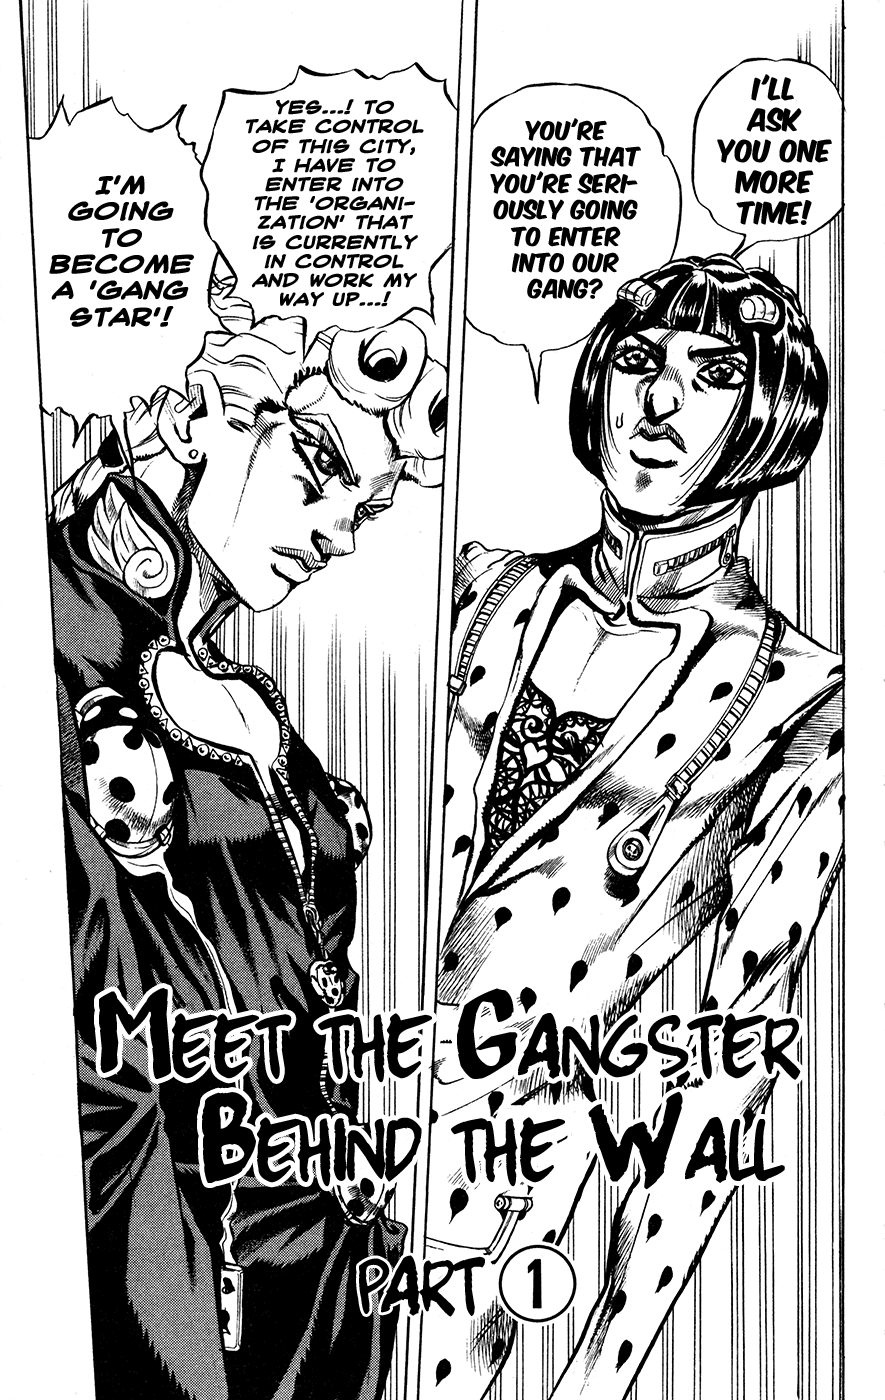 Jojo's Bizarre Adventure Part 5 - Vento Aureo Vol.2 Chapter 9: Meet The Gangster Behind The Wall Part 1 - Picture 1